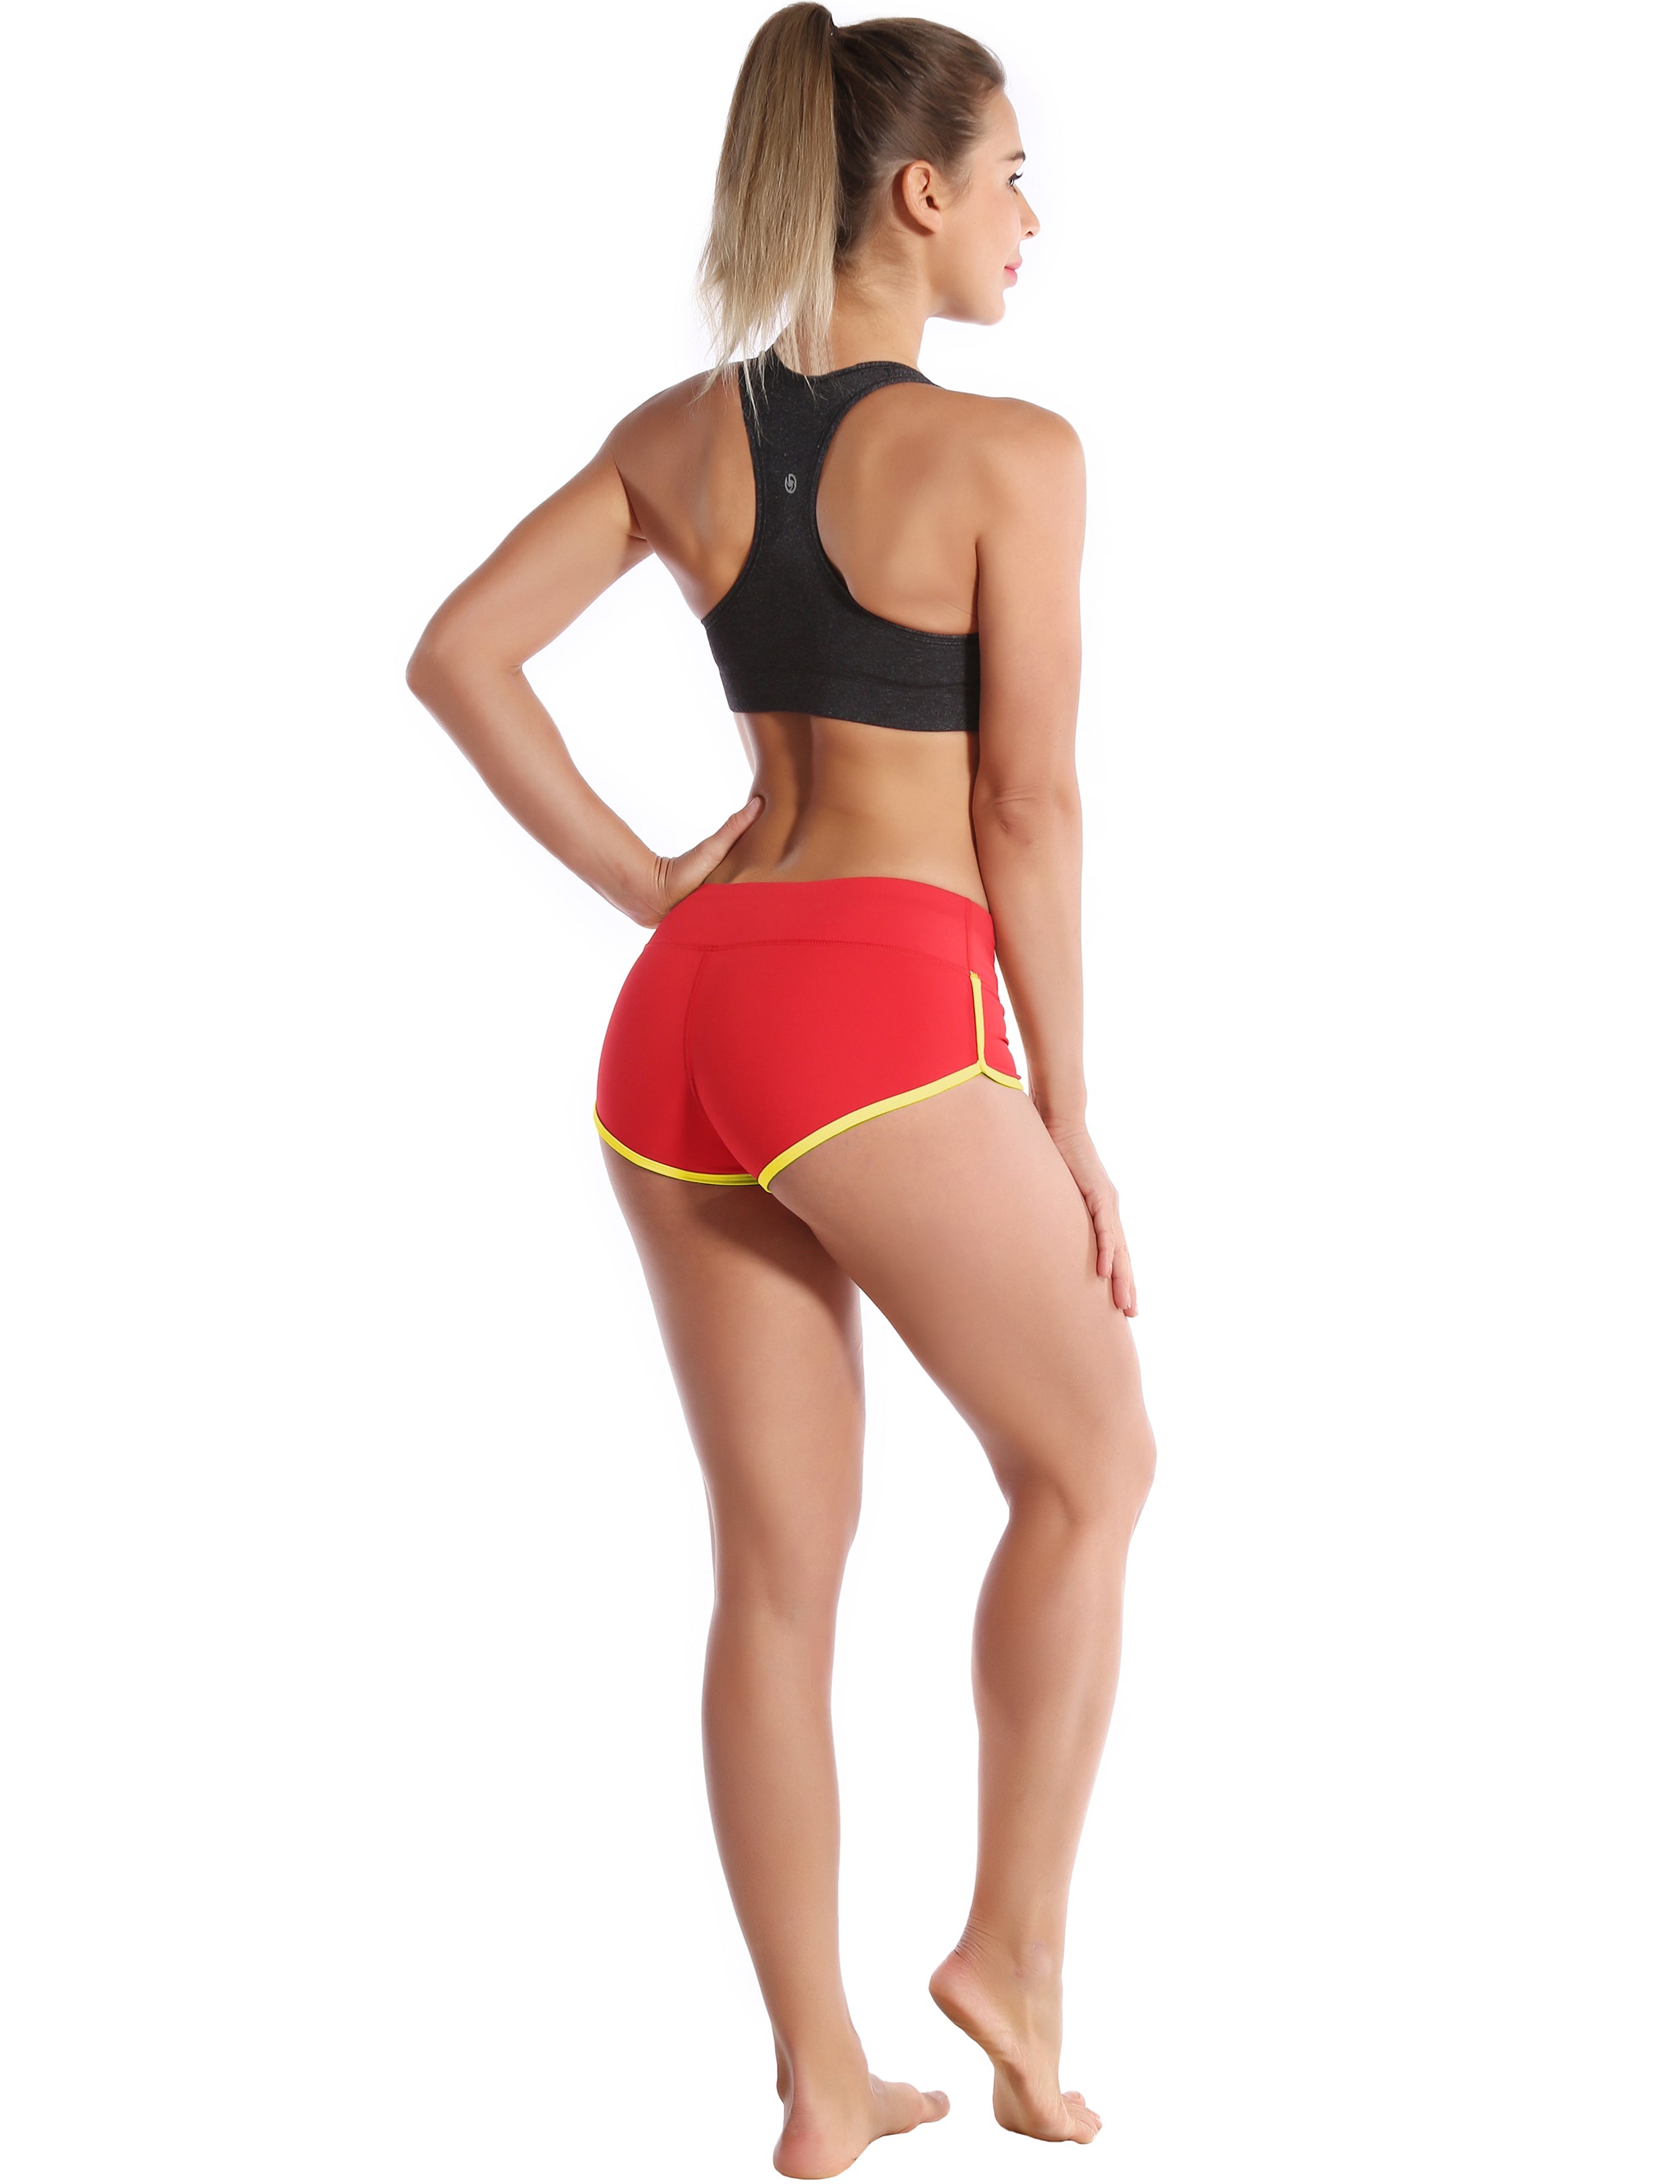 Sexy Booty Biking Shorts scarlet_fluorescentyellow Sleek, soft, smooth and totally comfortable: our newest sexy style is here. Softest-ever fabric High elasticity High density 4-way stretch Fabric doesn't attract lint easily No see-through Moisture-wicking Machine wash 75%Nylon/25%Spandex